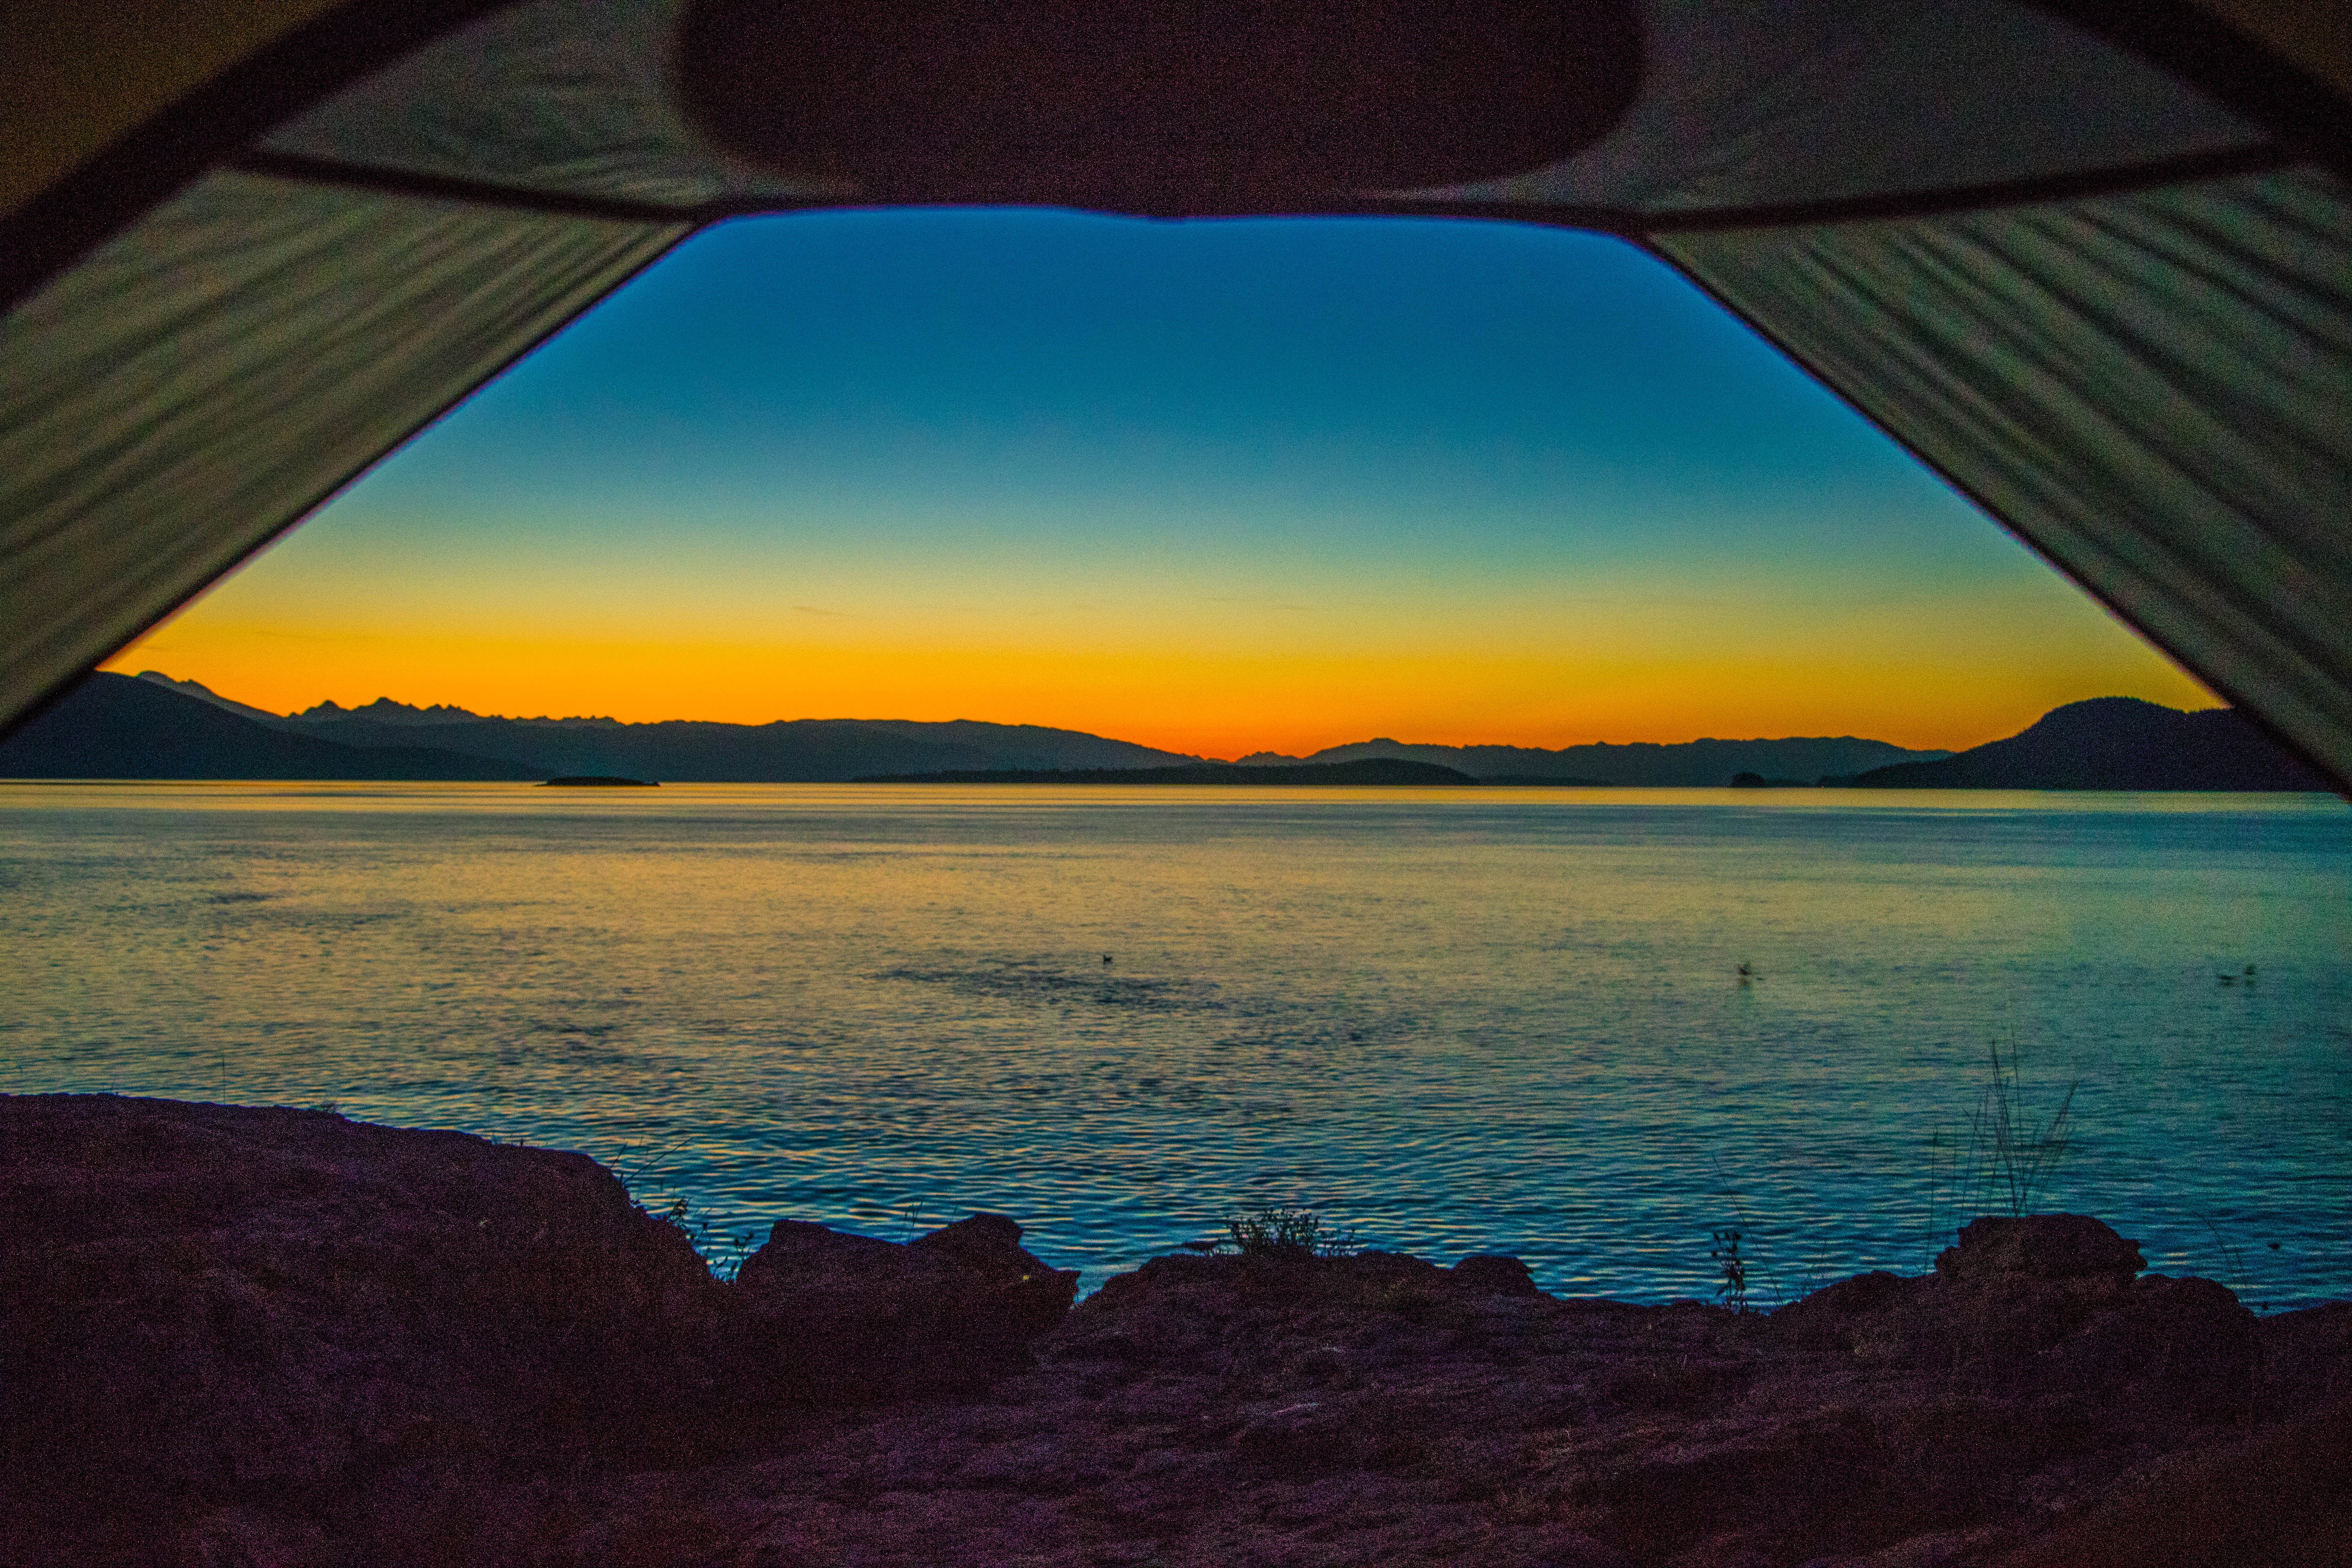 Awesome tent view at sunrise!